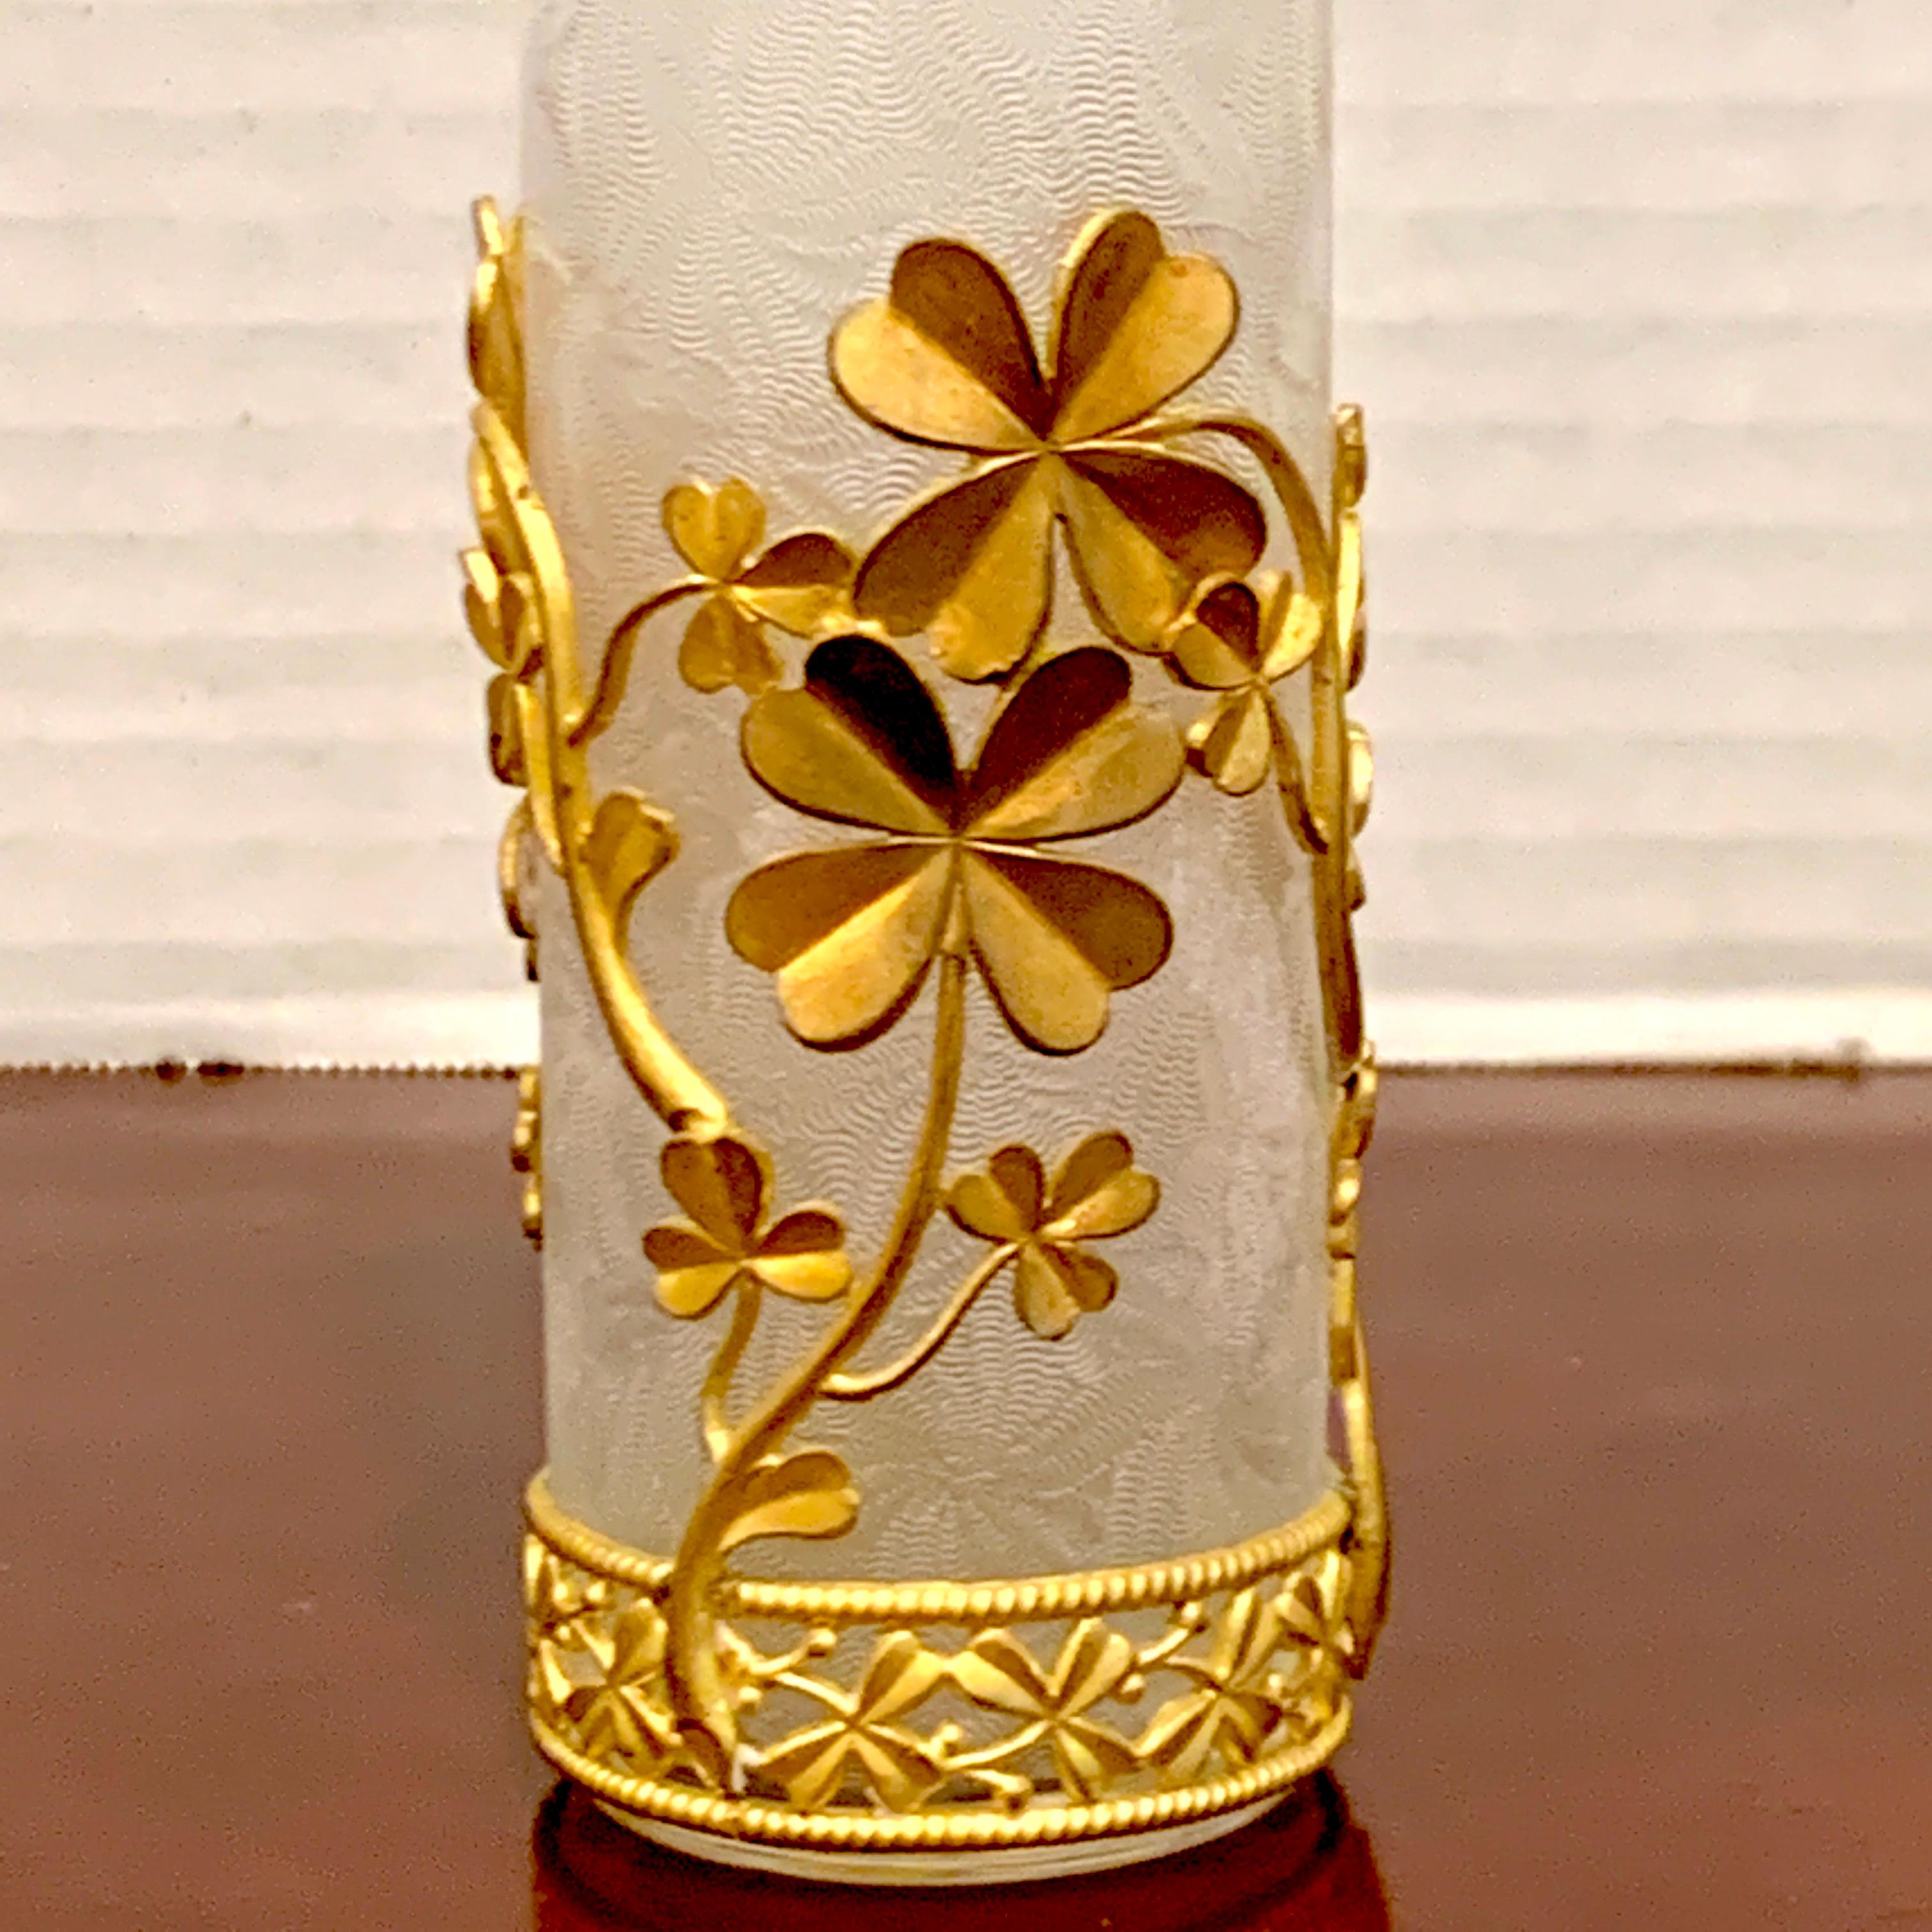 French Belle Epoque Baccarat Attributed Four-Leaf Clover Ormolu Mounted Vase For Sale